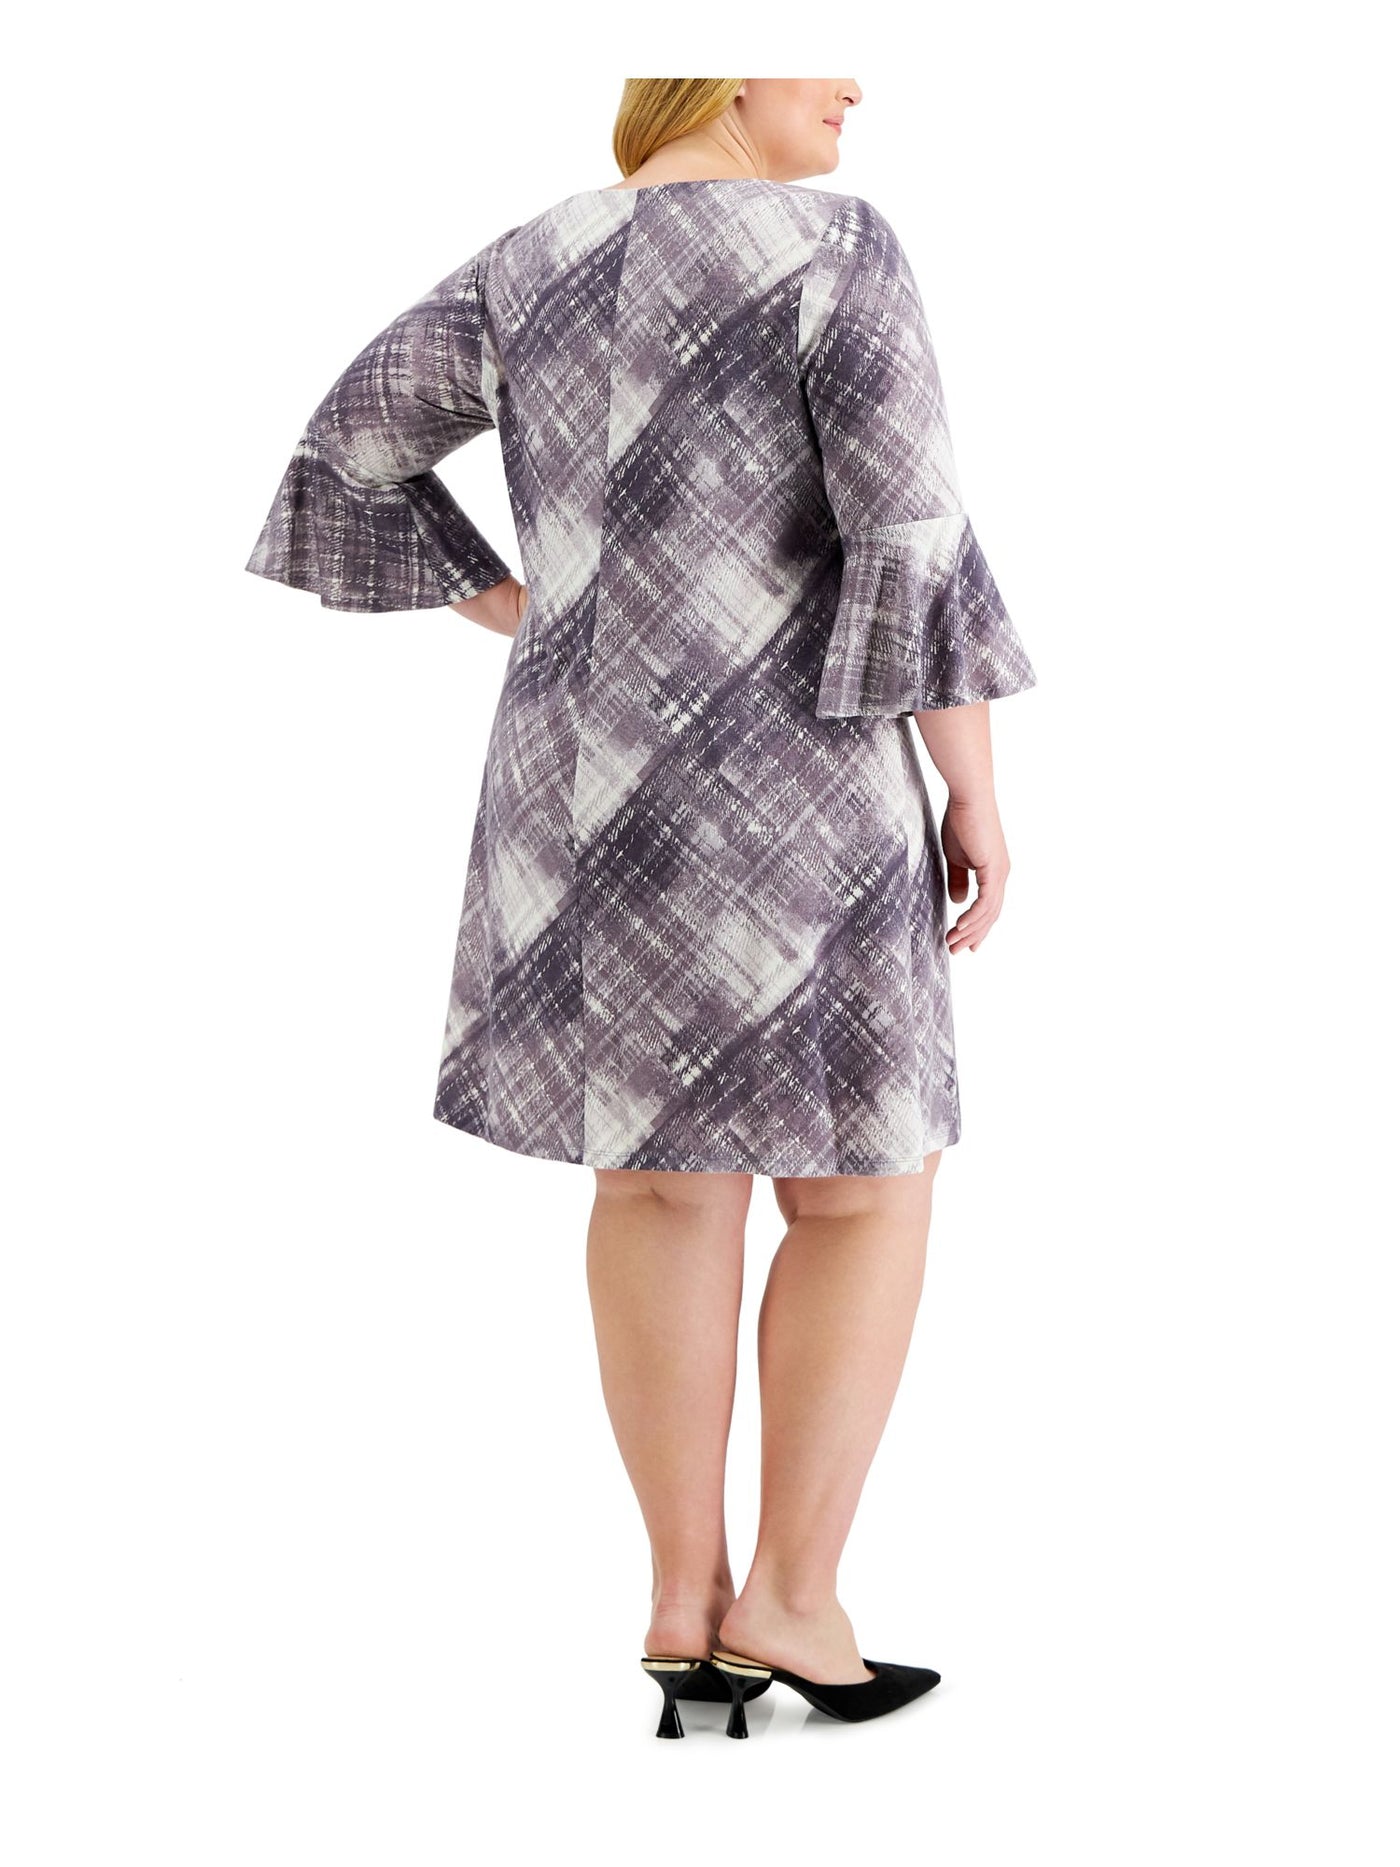 CONNECTED APPAREL Womens Purple Stretch Plaid Bell Sleeve Round Neck Above The Knee Wear To Work Fit + Flare Dress Plus 18W